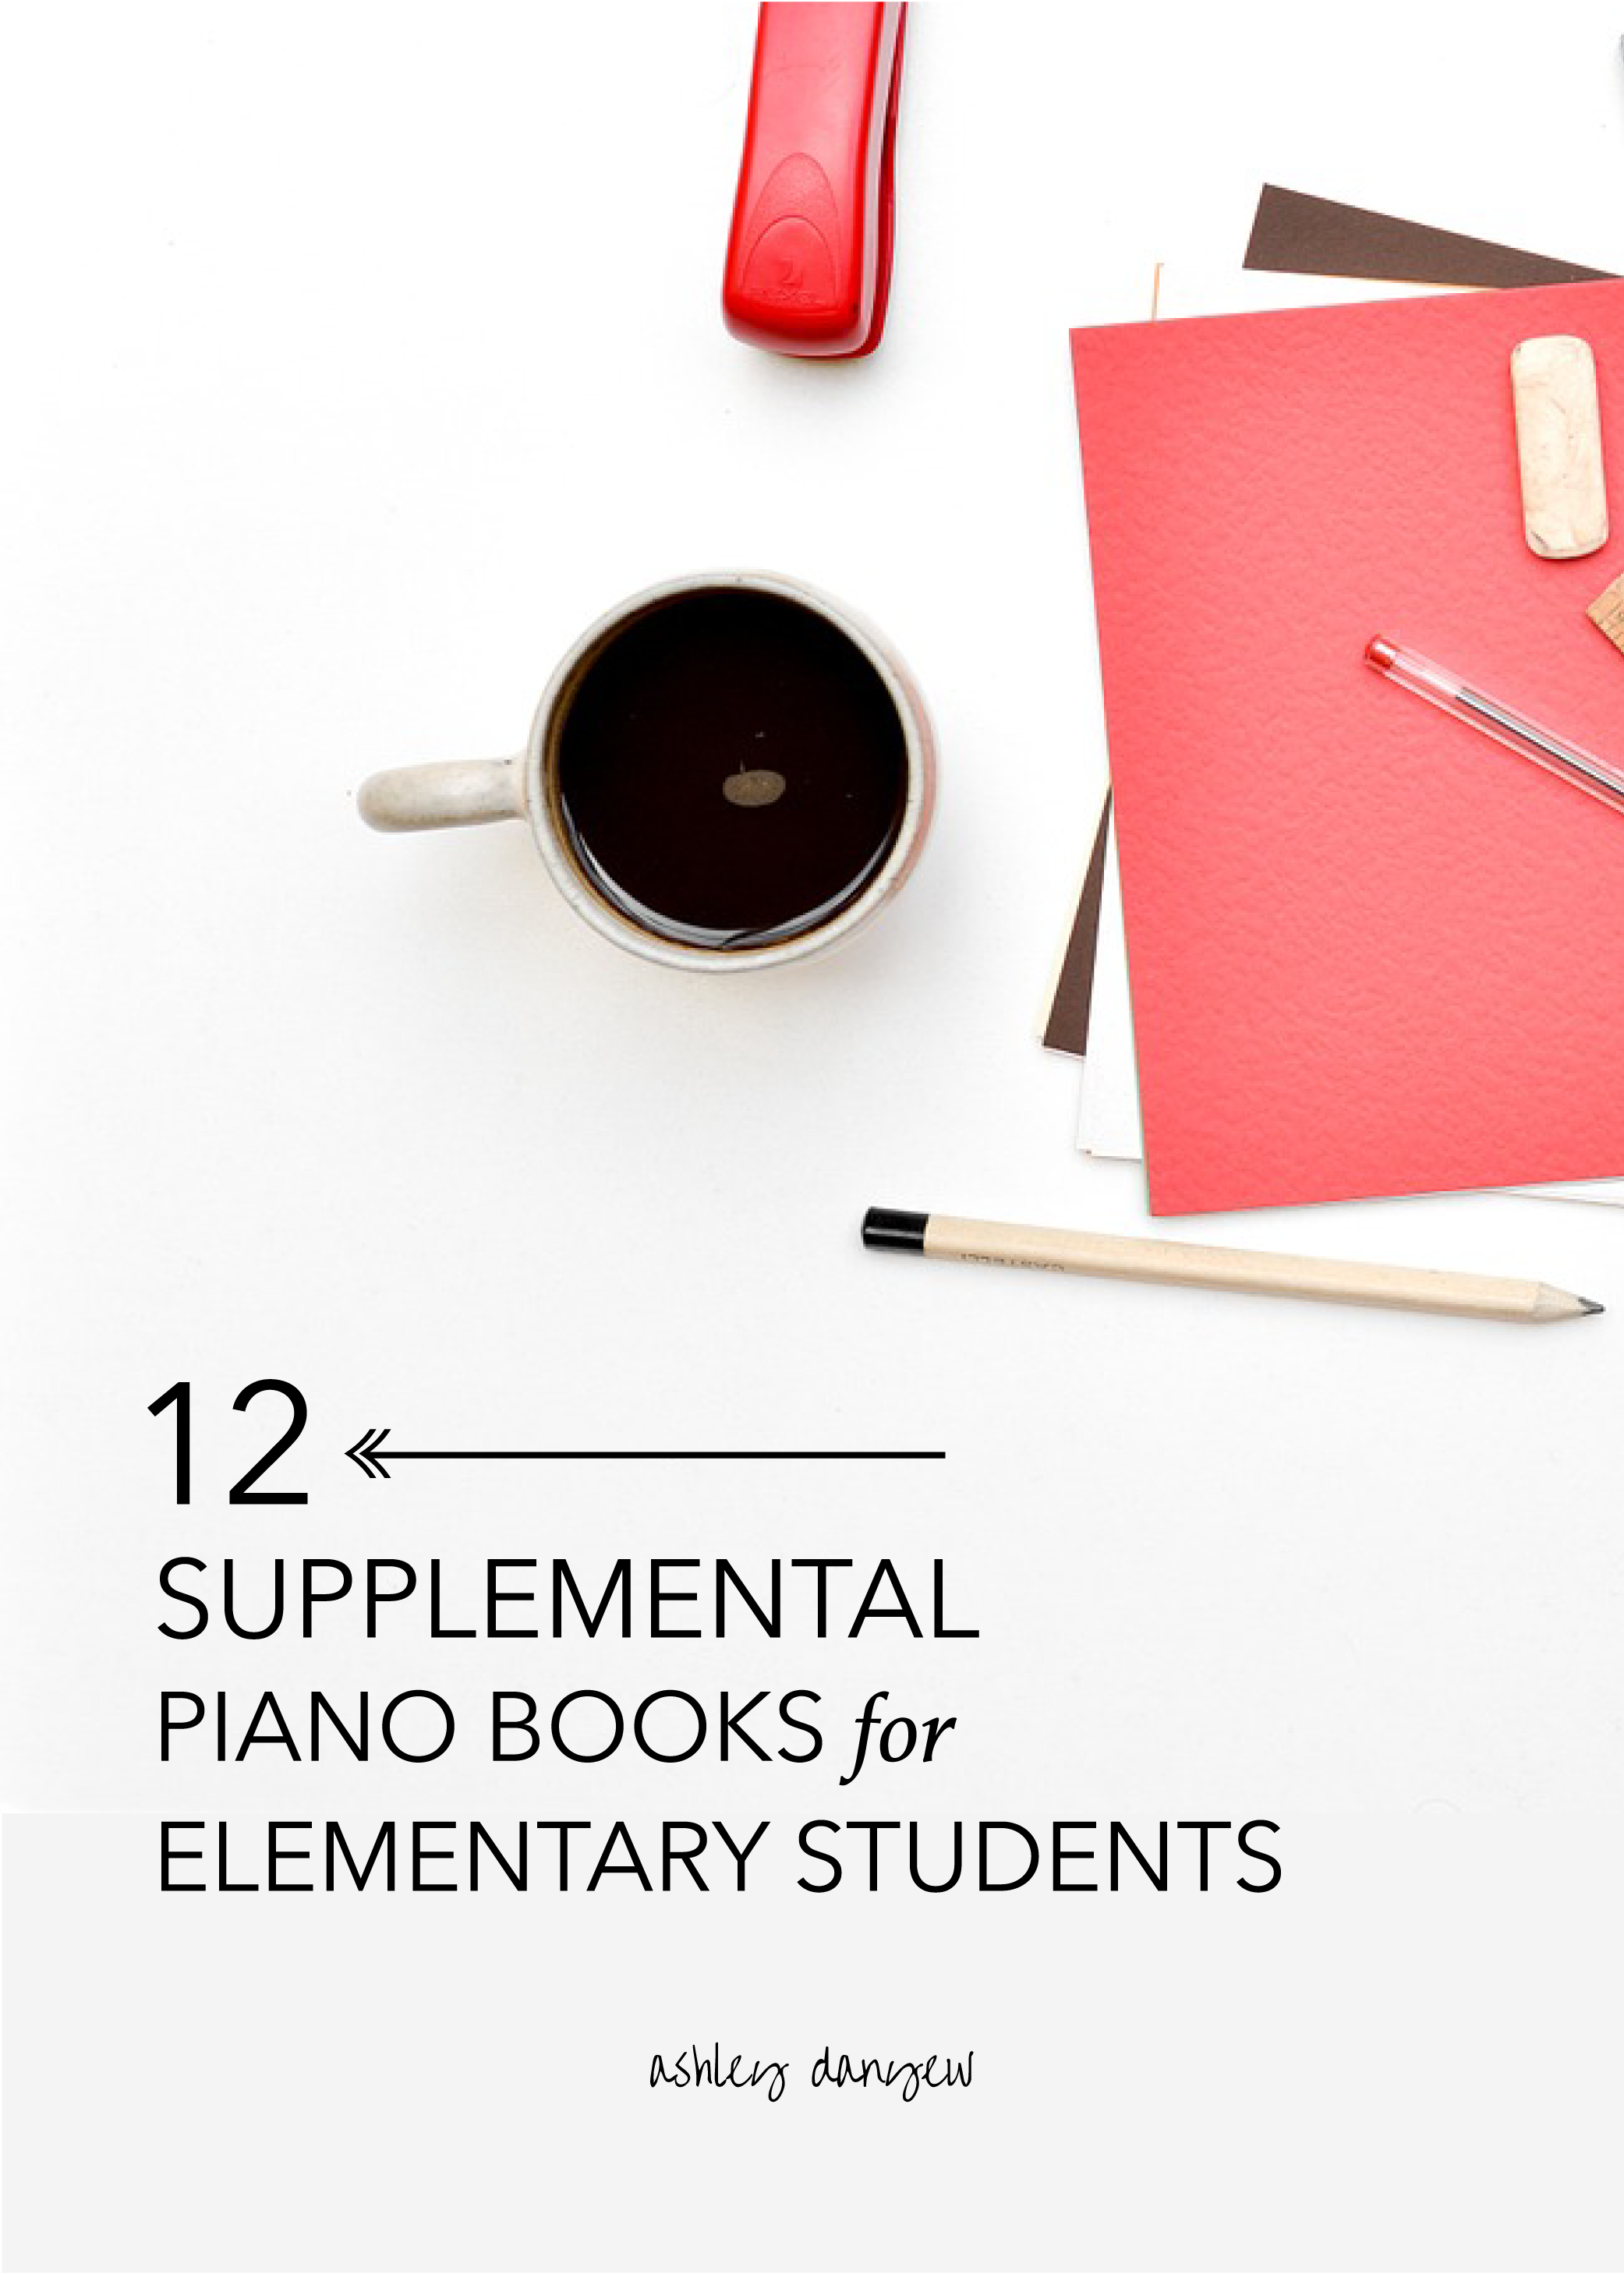 12-favorite-supplemental-piano-books-for-elementary-students-ashley